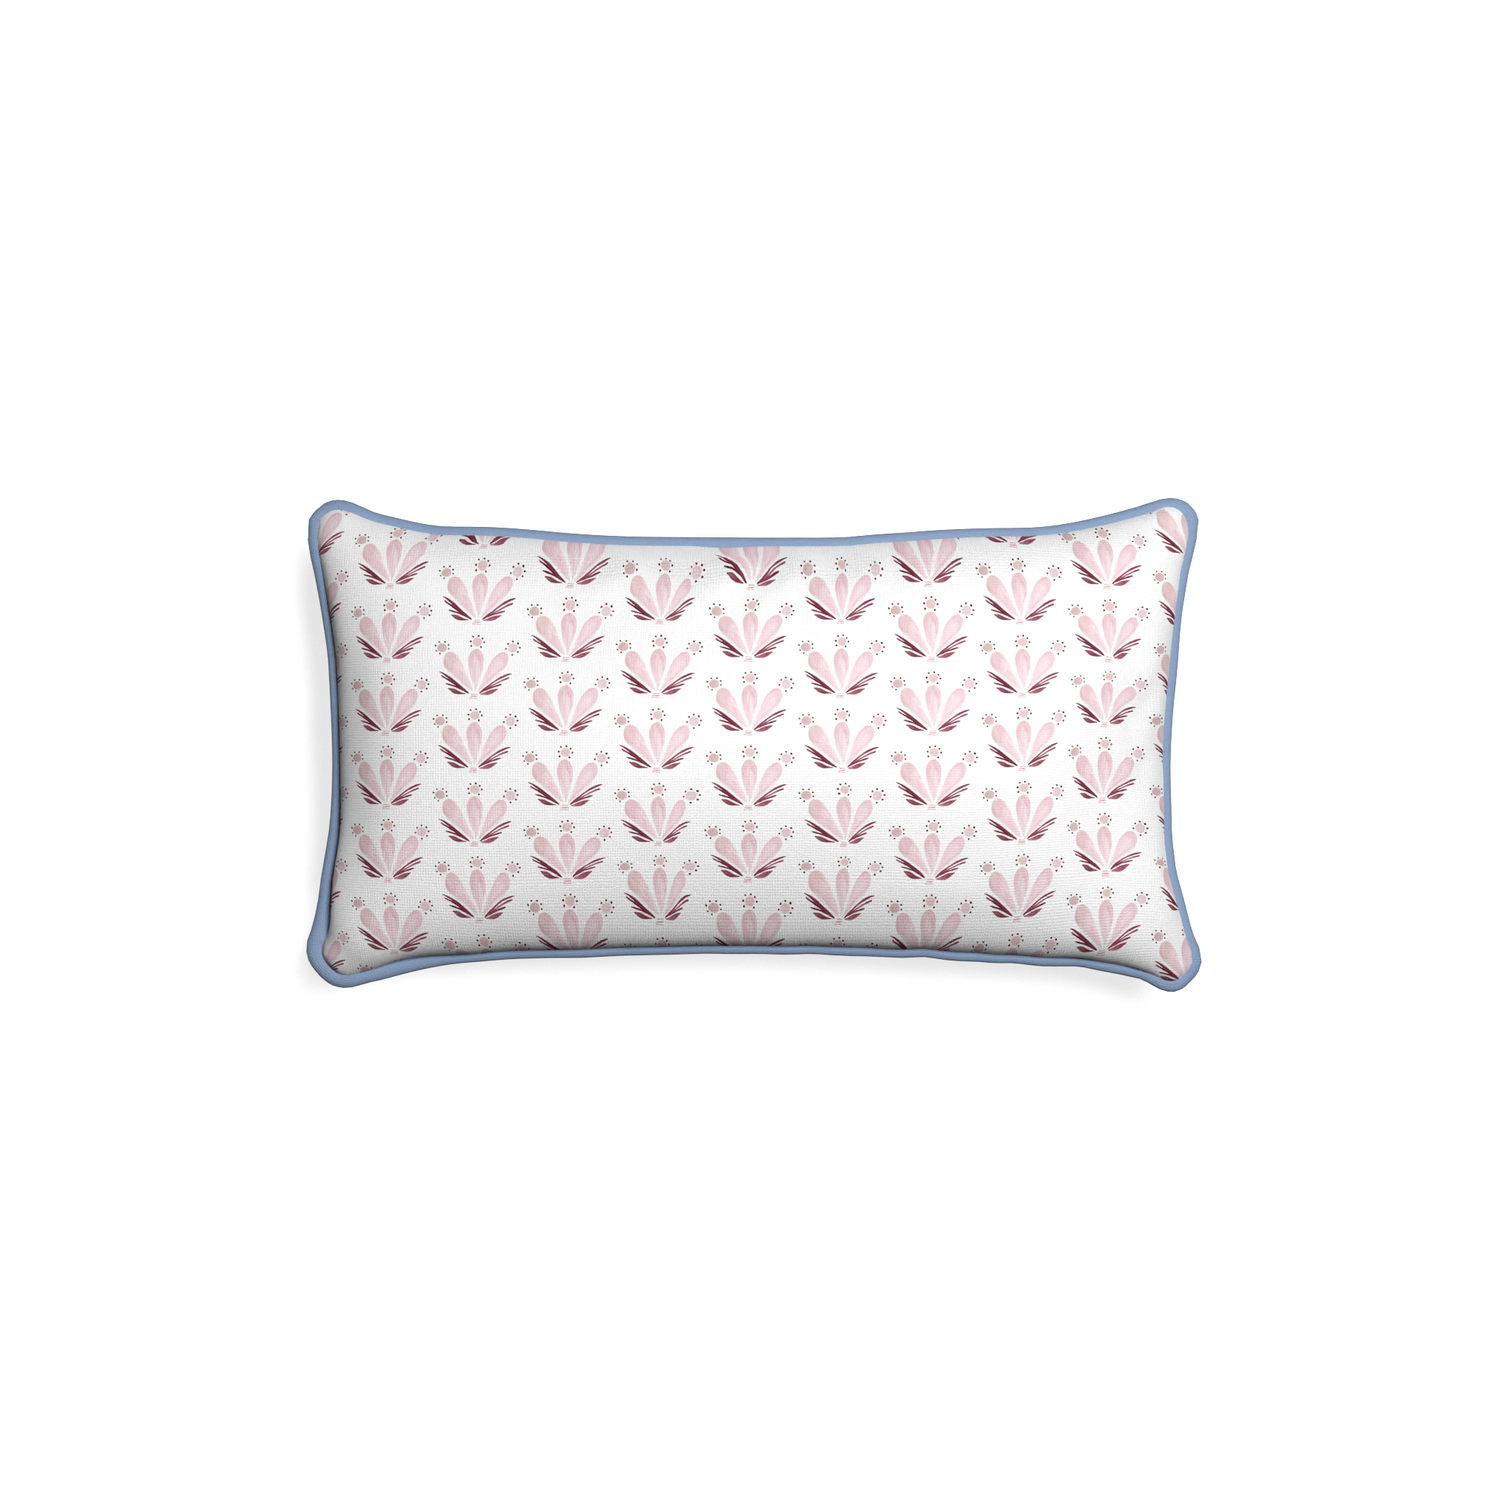 Petite-lumbar serena pink custom pink & burgundy drop repeat floralpillow with sky piping on white background